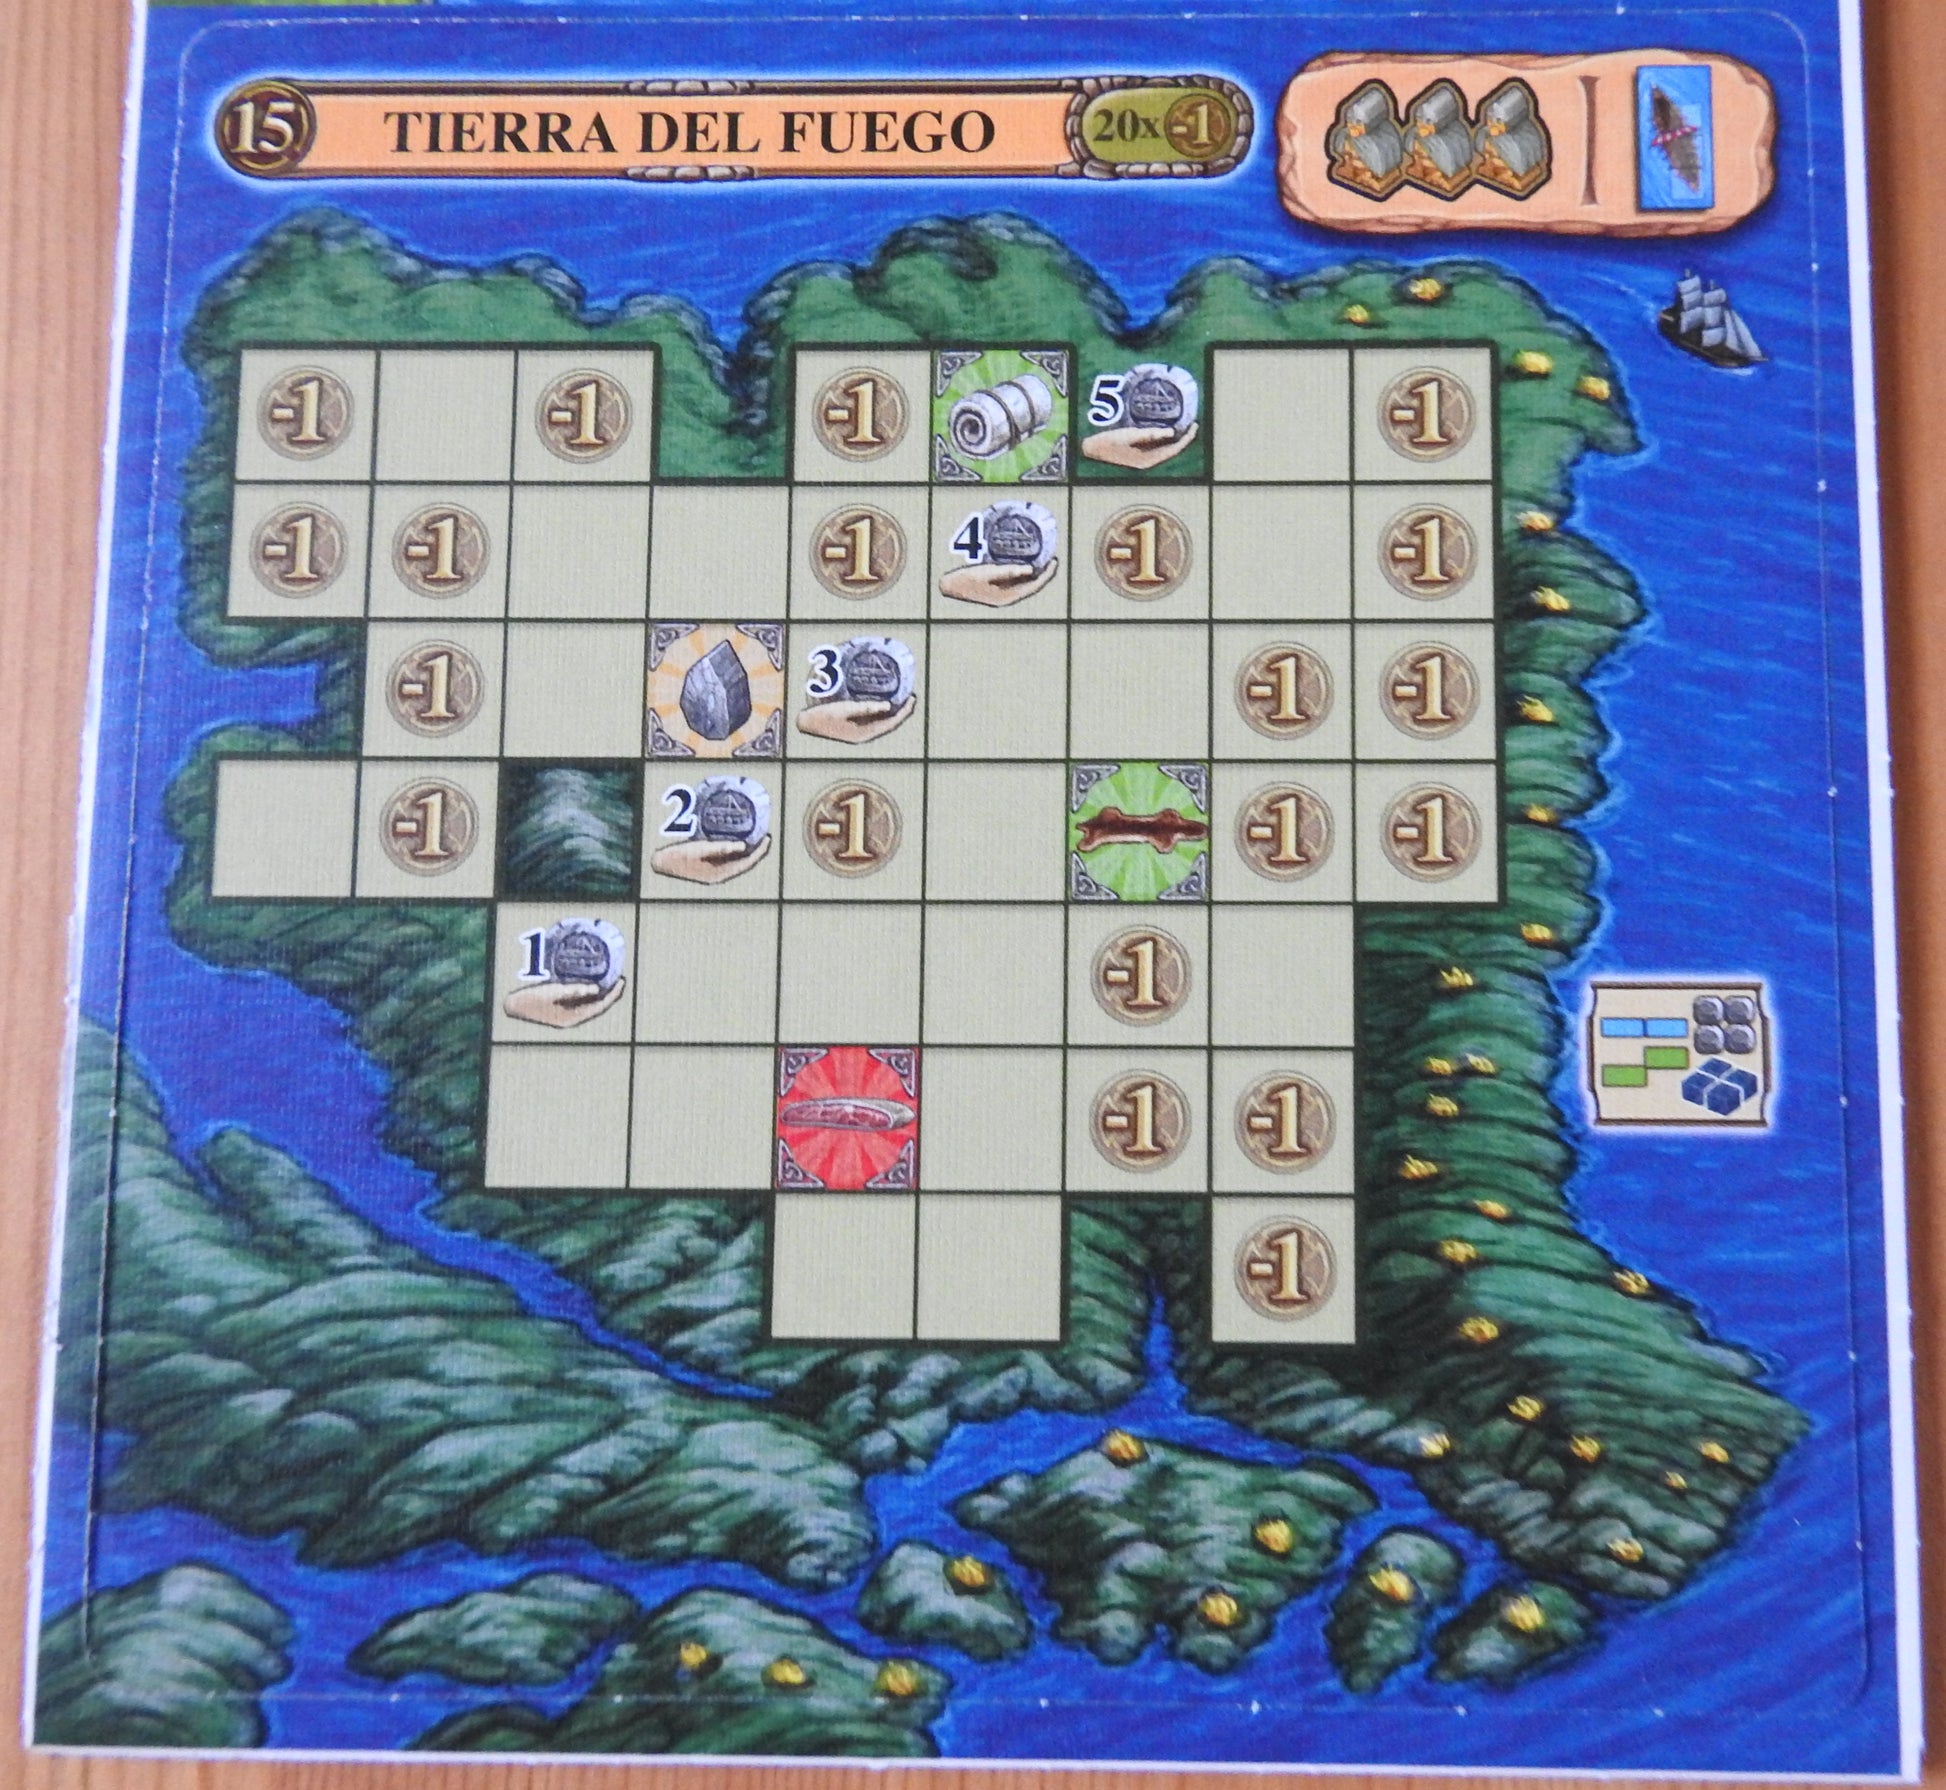 Close-up view of the Tierra del Fuego (night-time) exploration board.